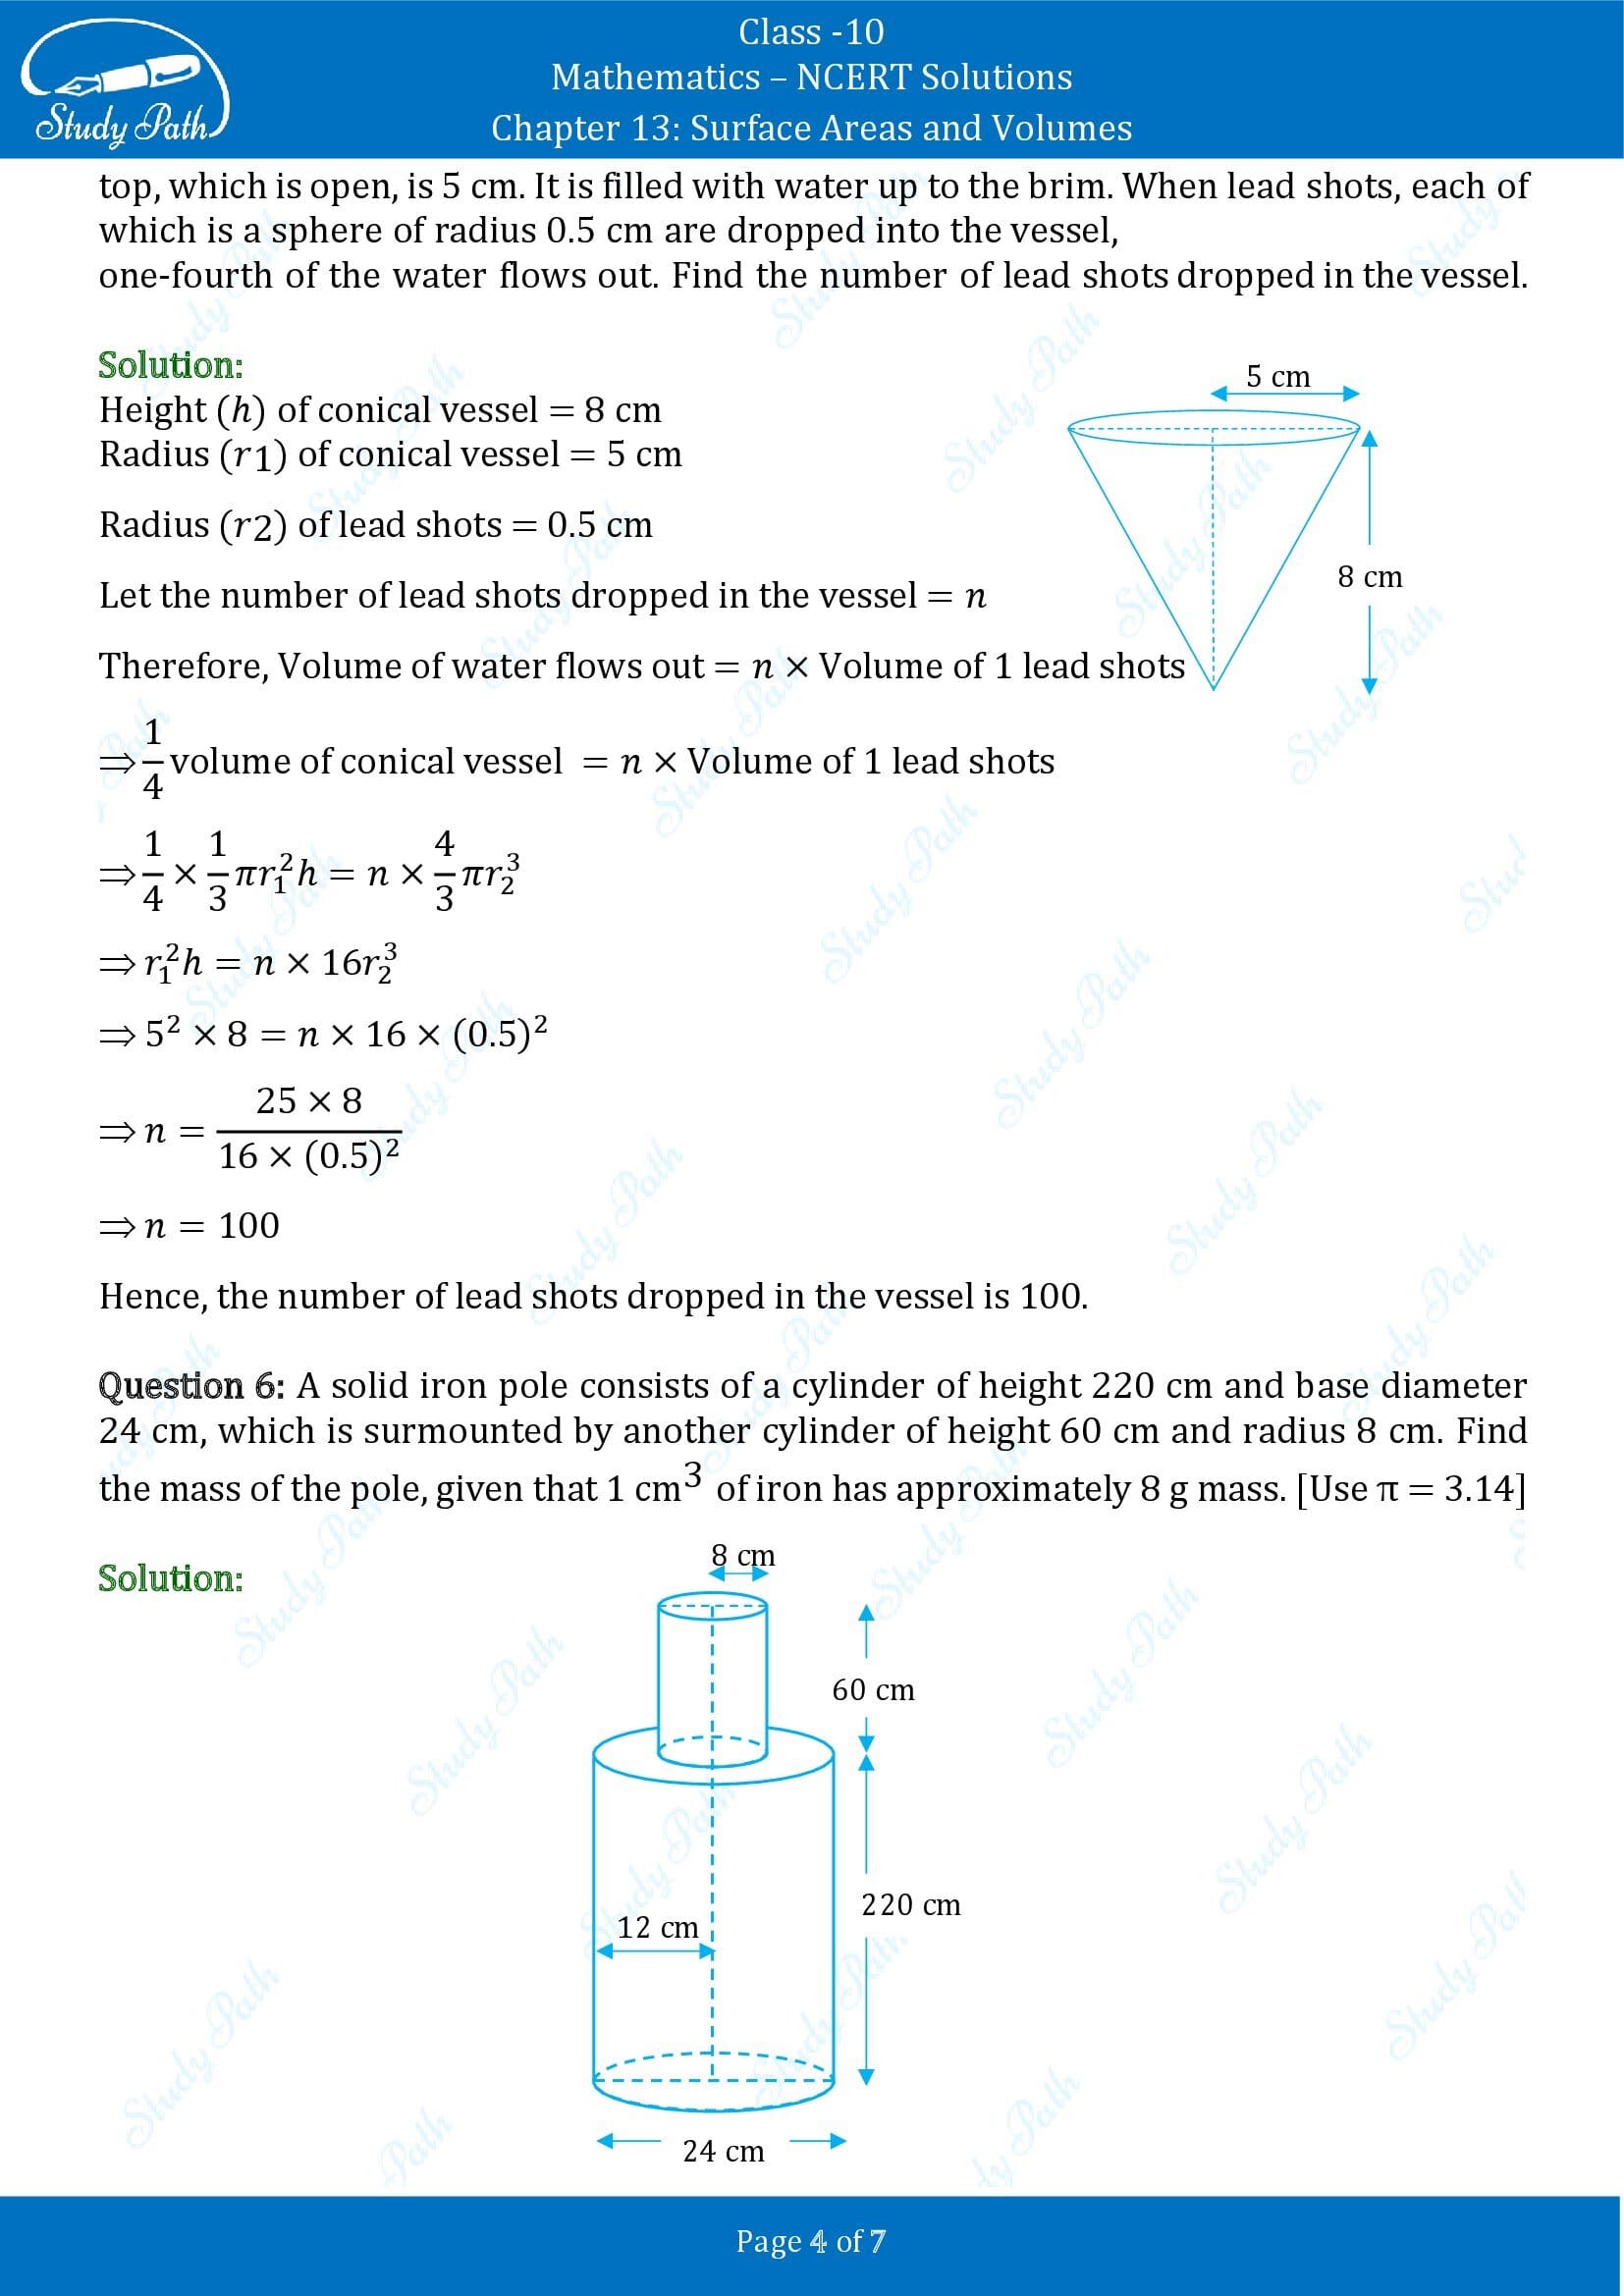 NCERT Solutions for Class 10 Maths Chapter 13 Surface Areas and Volumes Exercise 13.2 00004